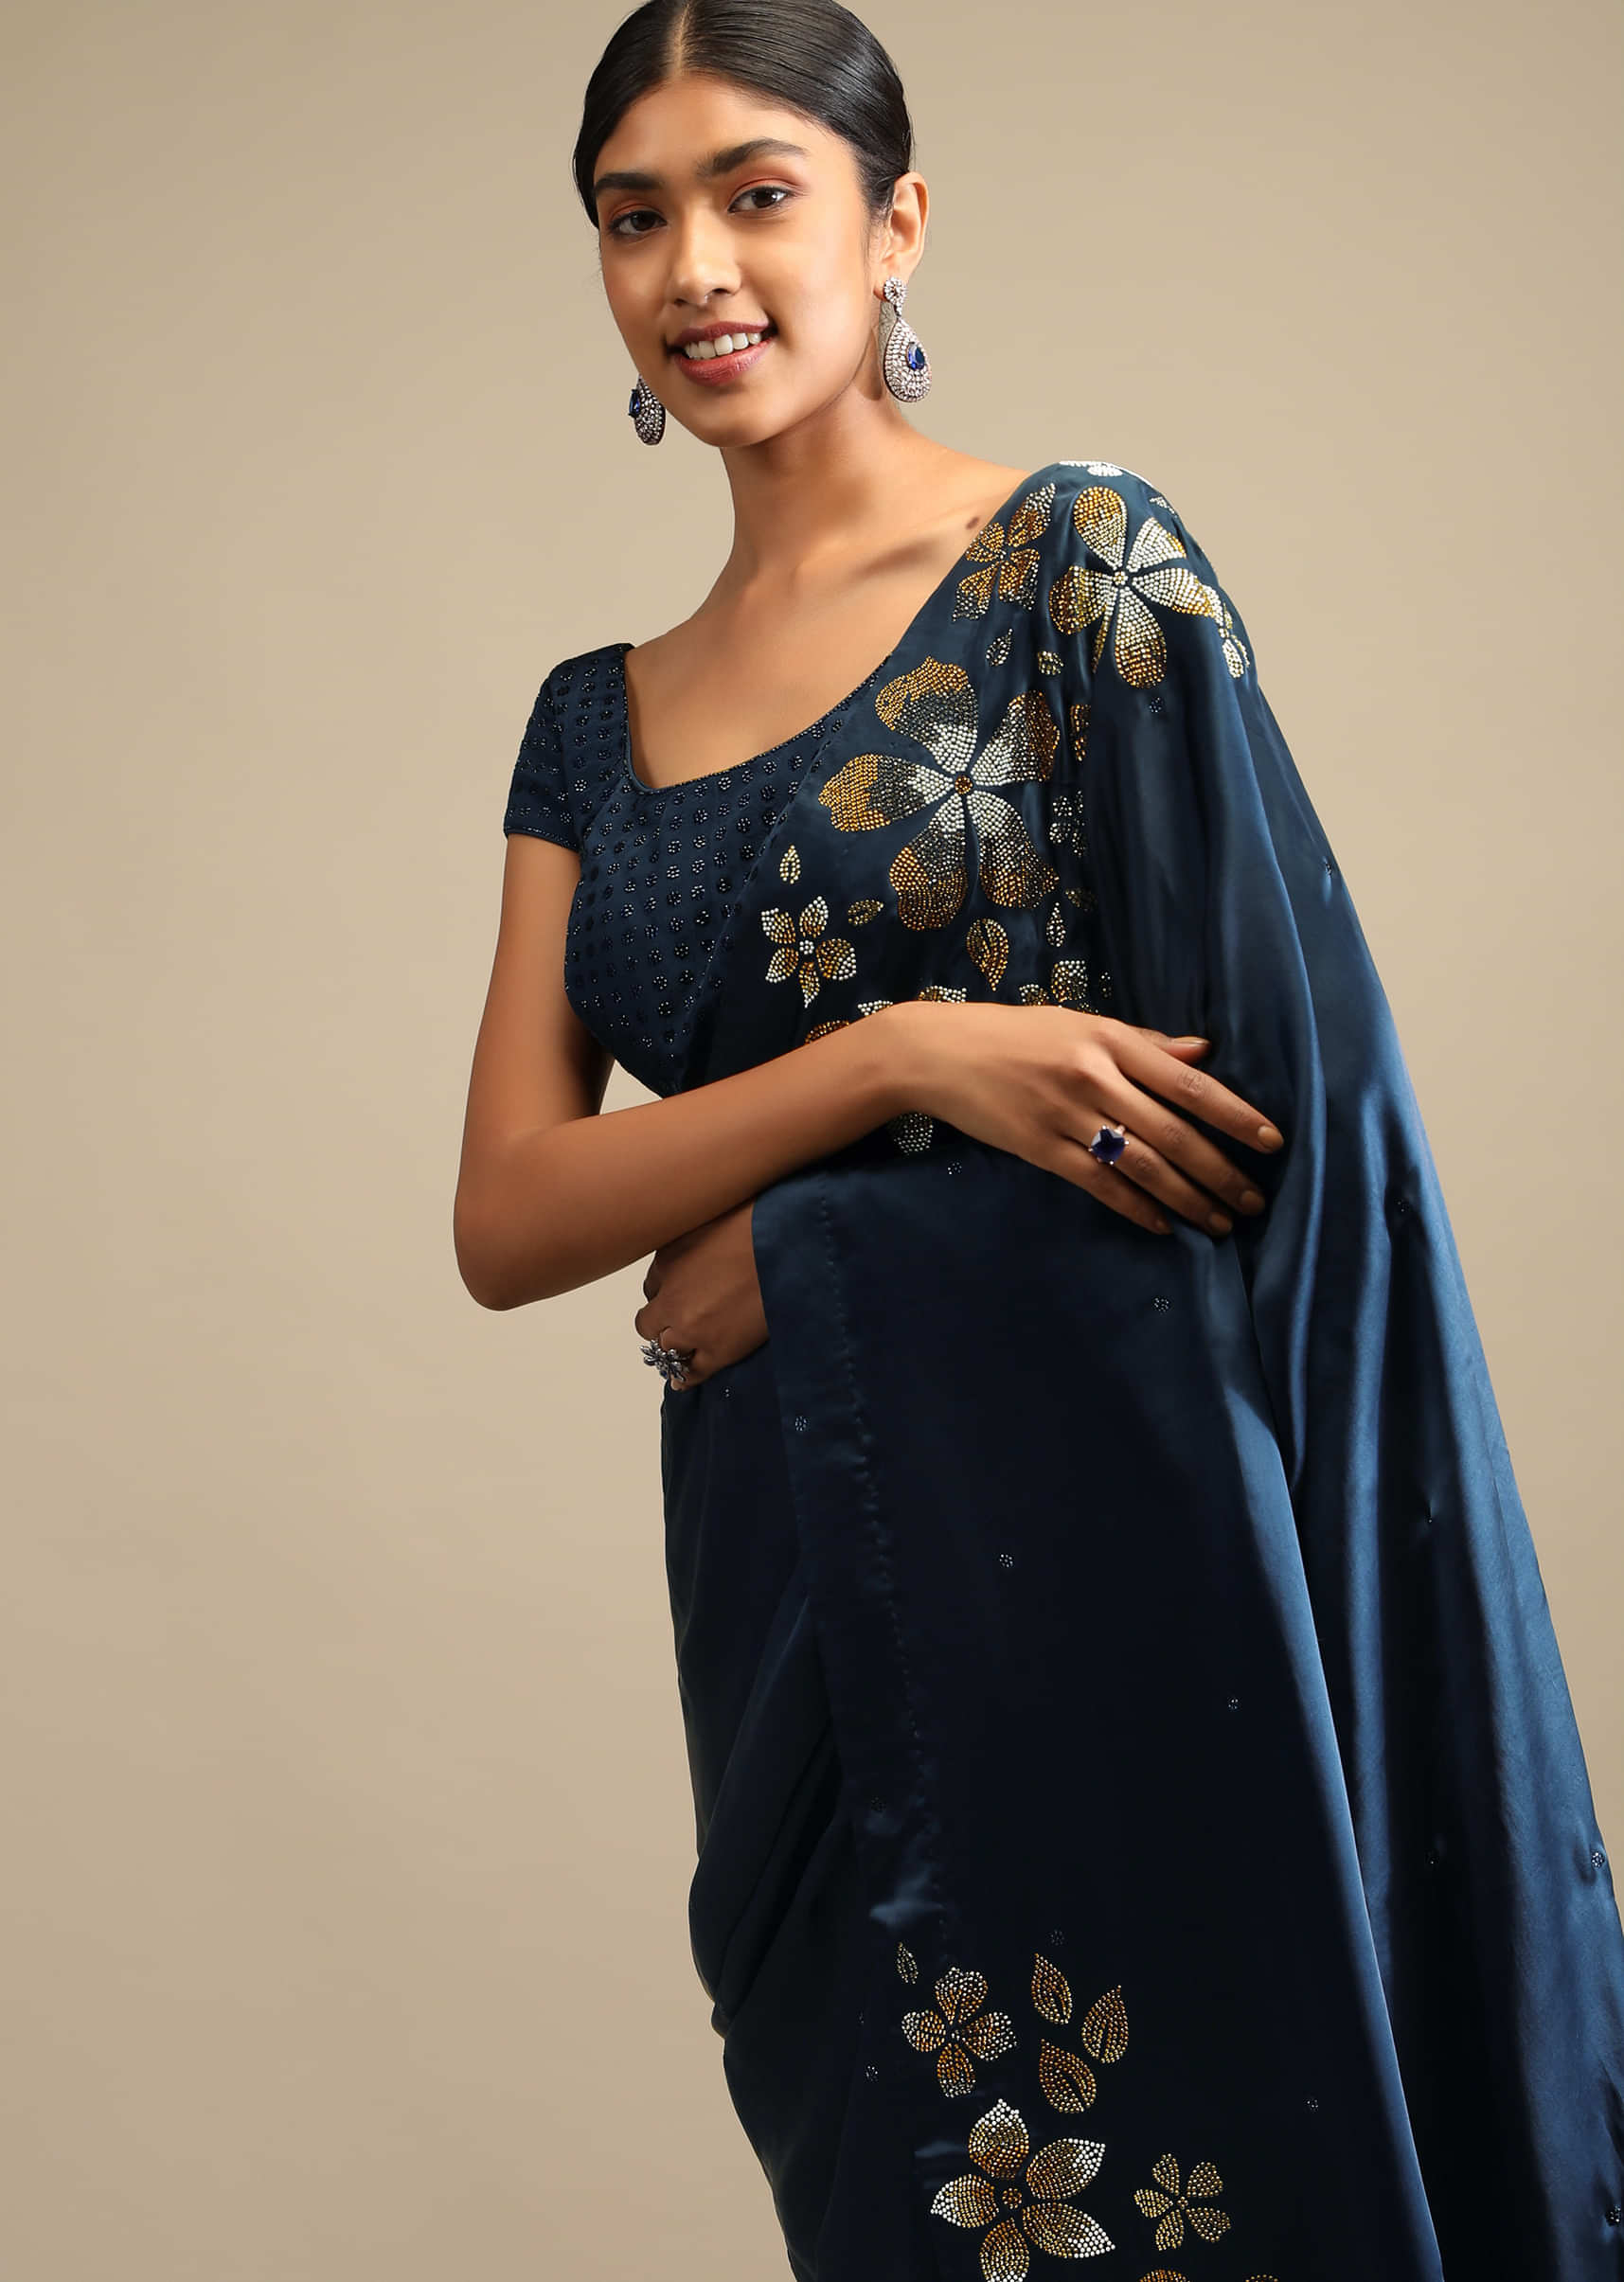 Midnight Blue Saree In Satin With Three Toned Kundan Embellished Floral Motifs Along The Border  